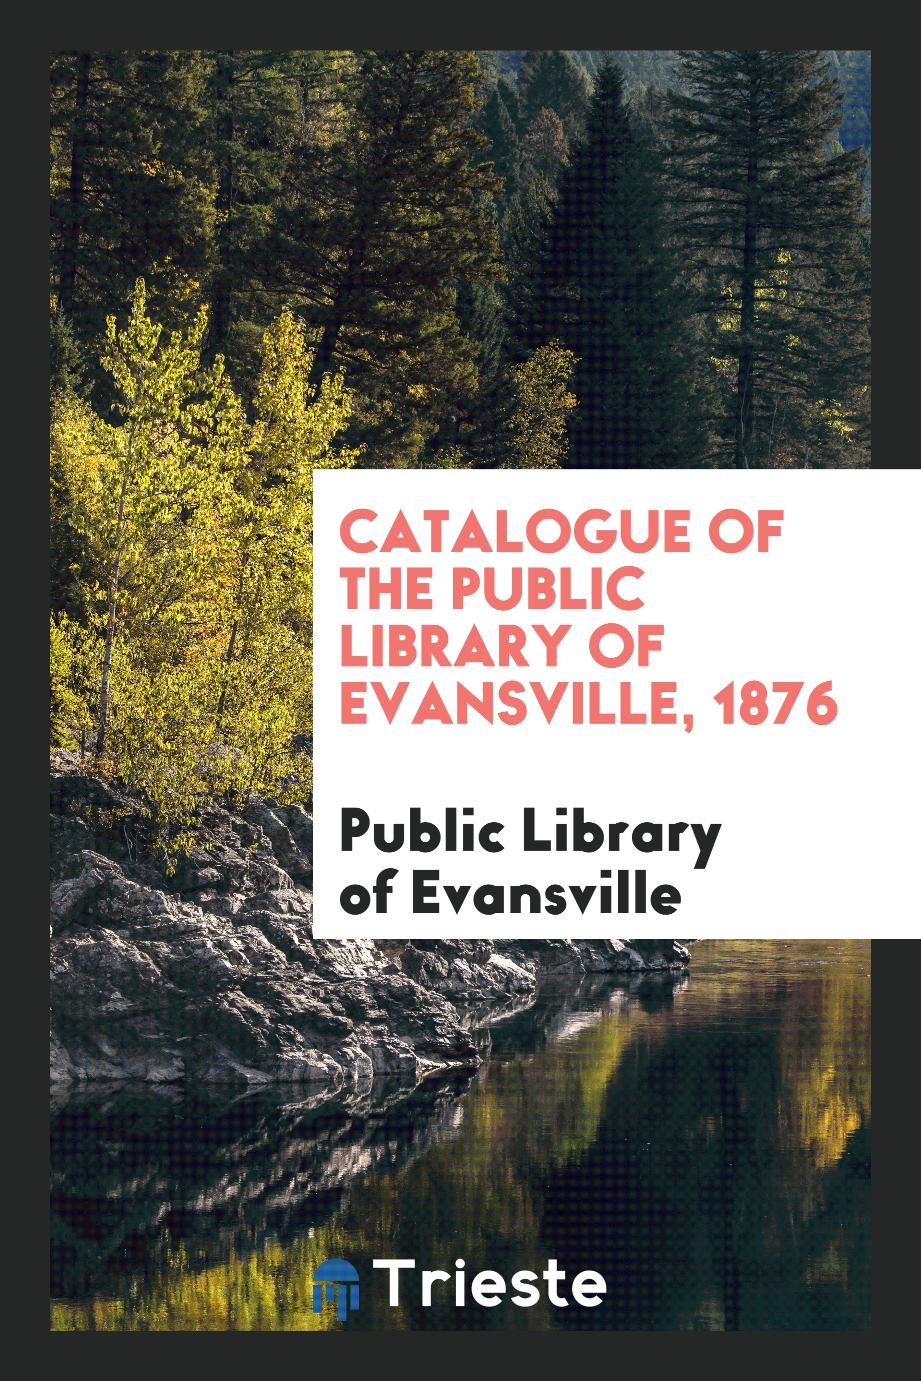 Catalogue of the Public Library of Evansville, 1876